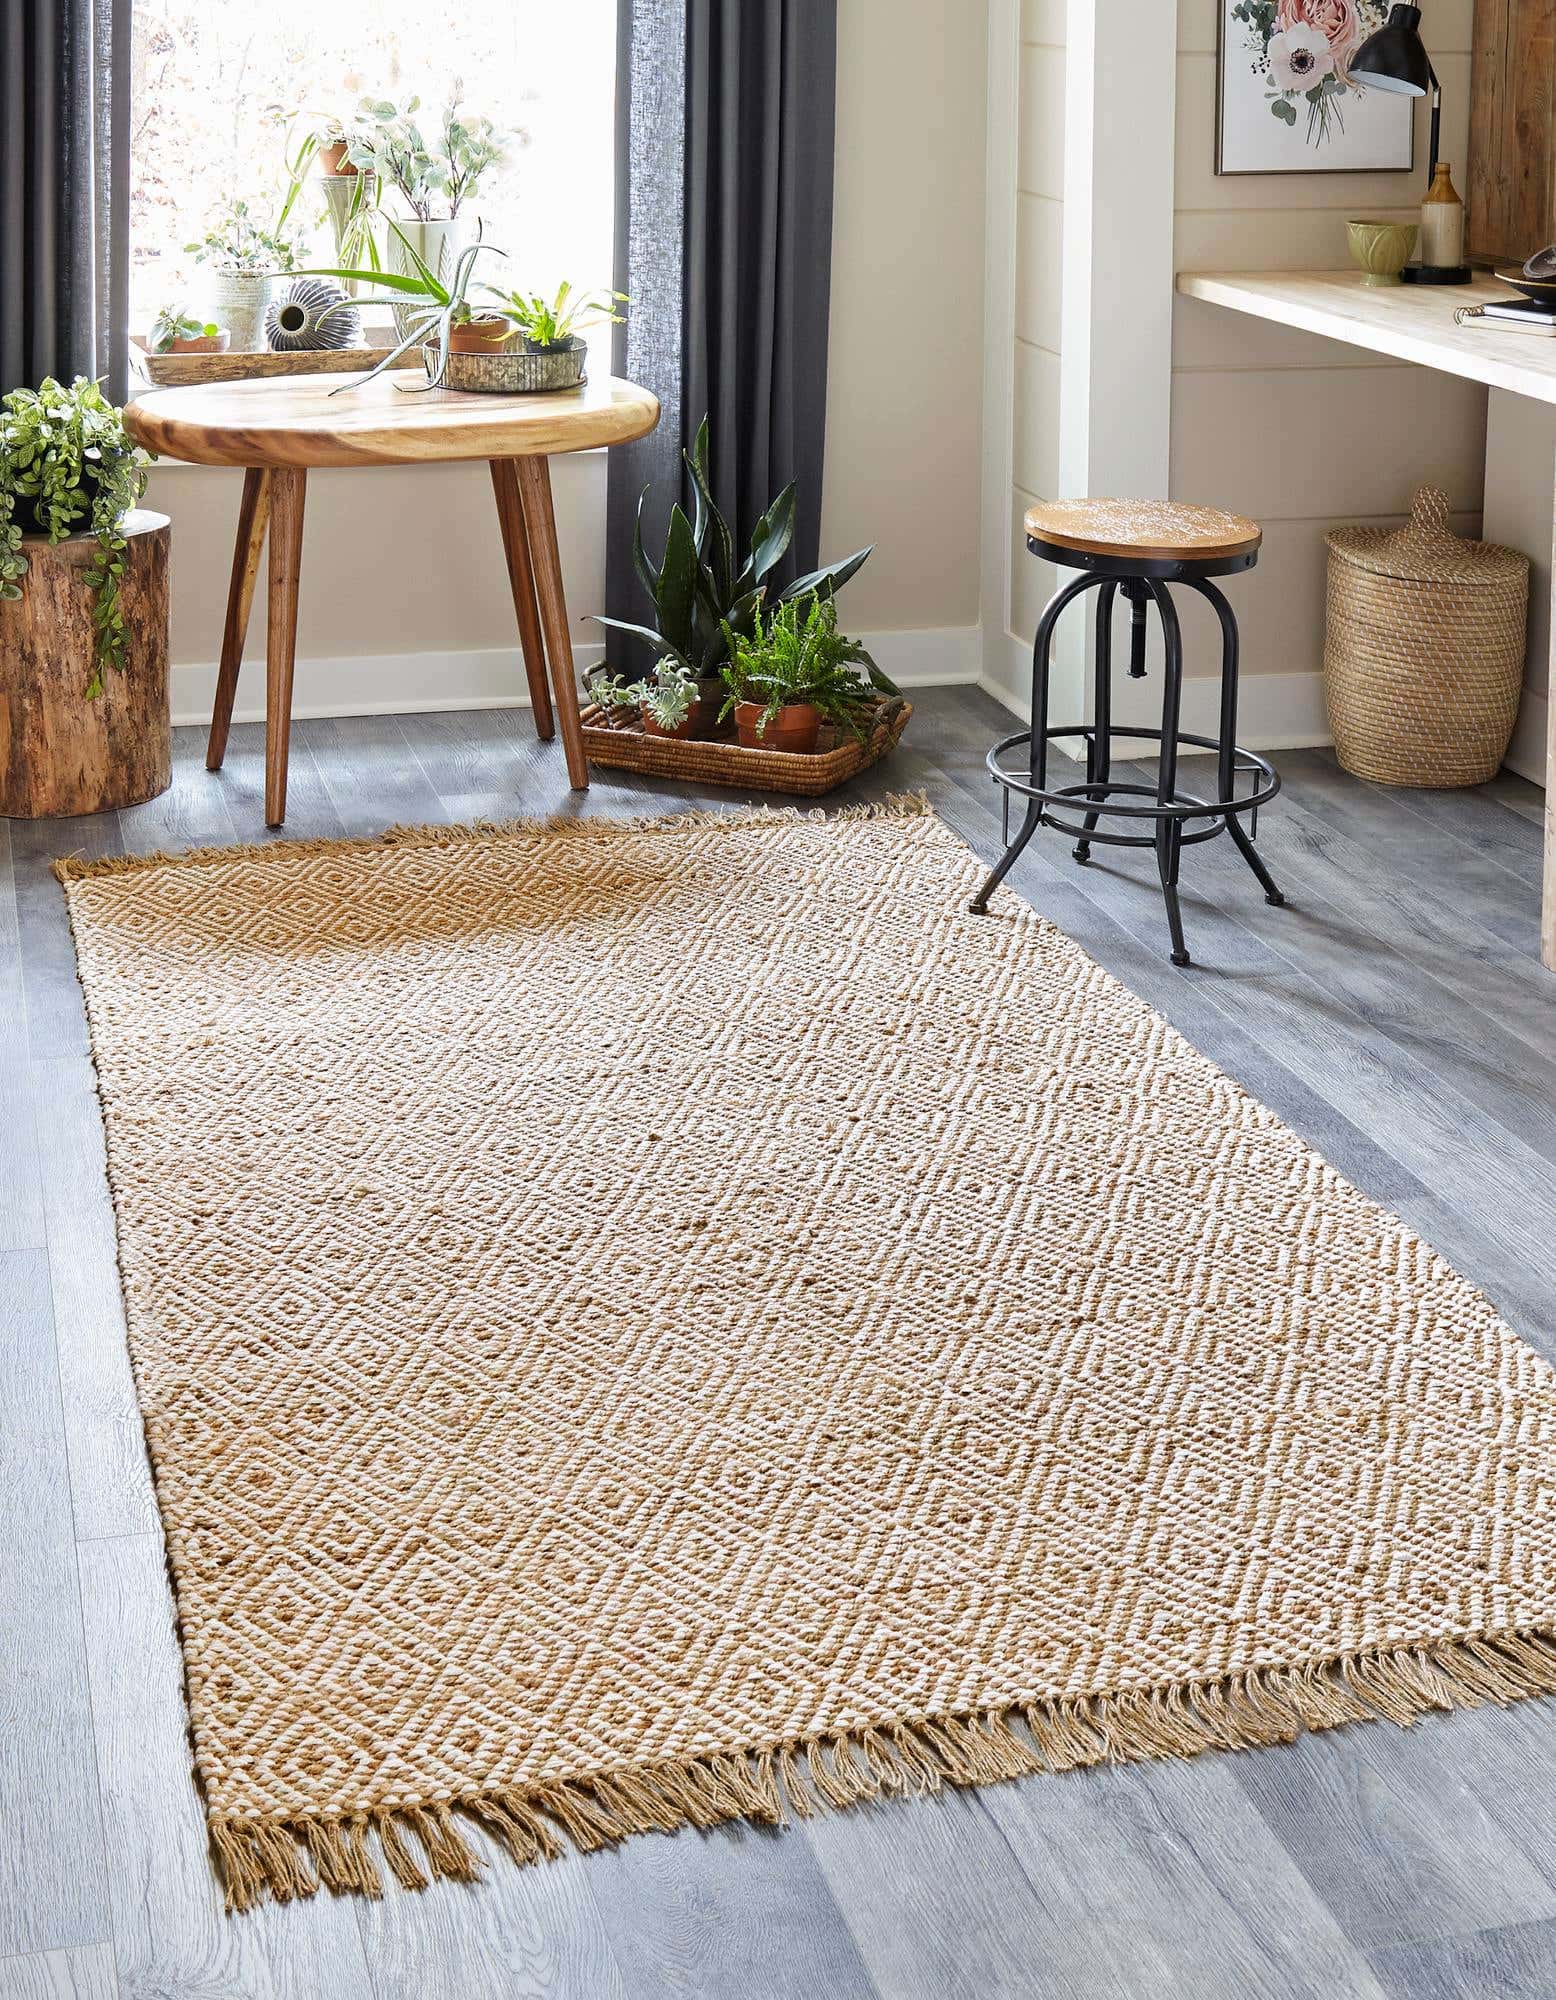 Warm Up Your Greys with Braided Jute